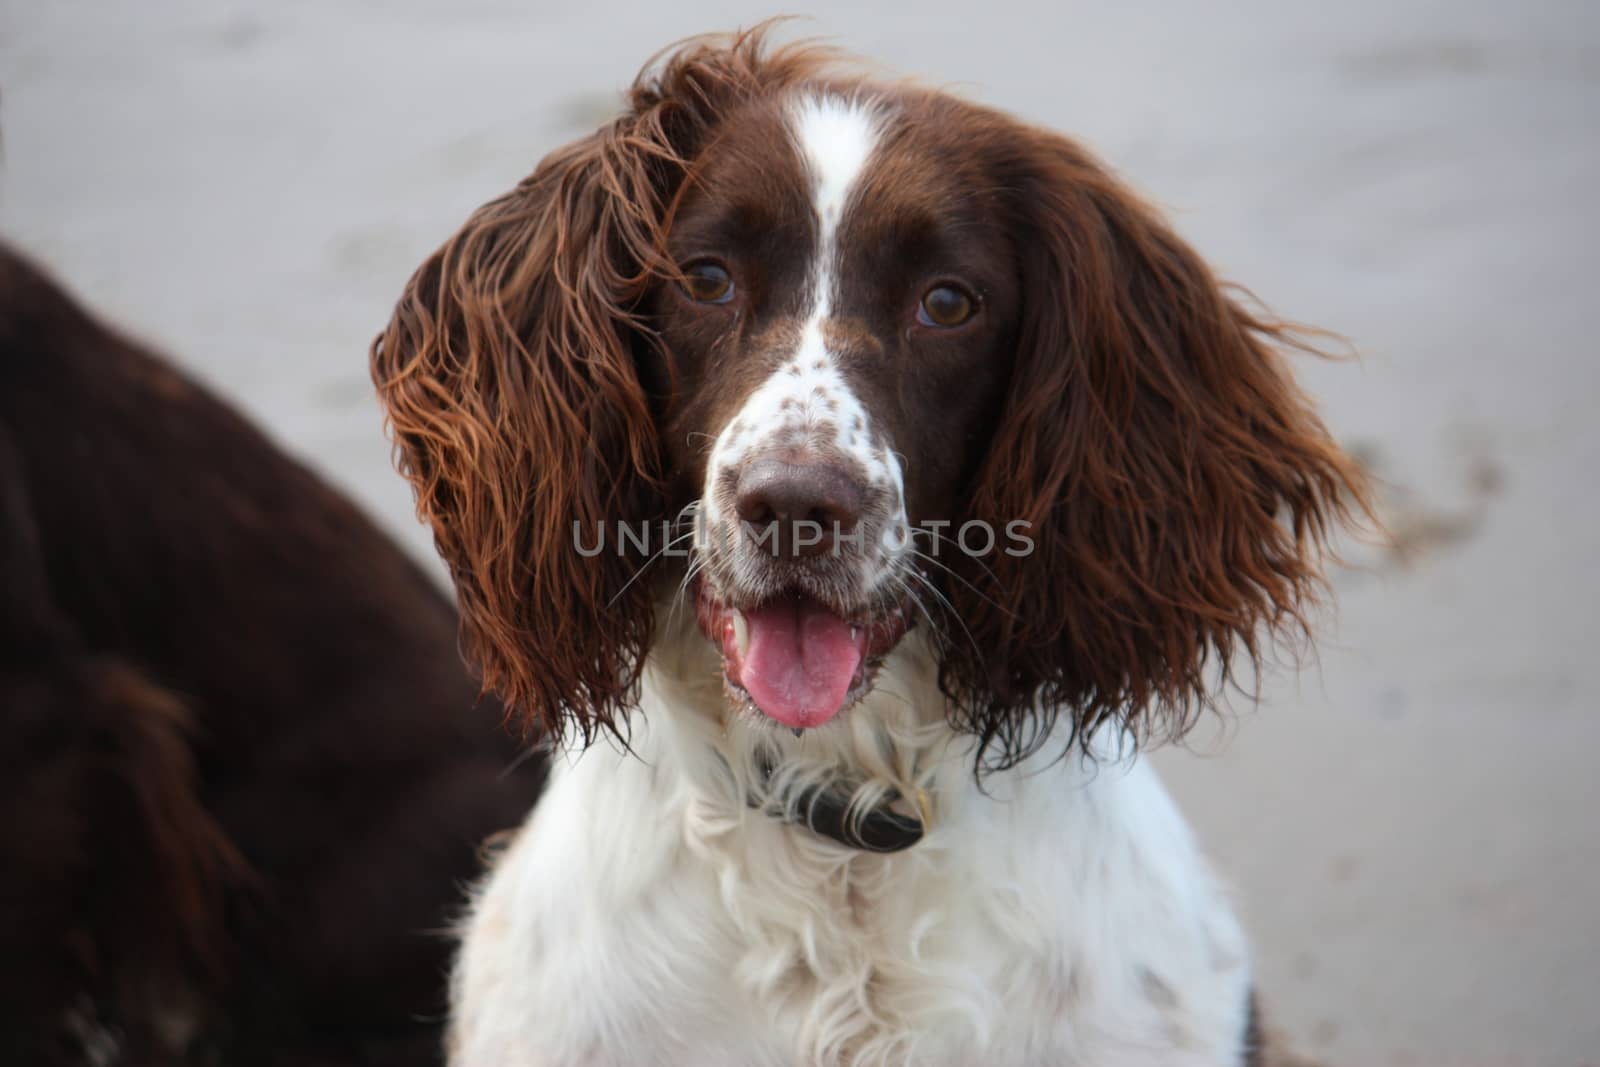 Very cute liver and white working english springer spaniel pet g by chrisga